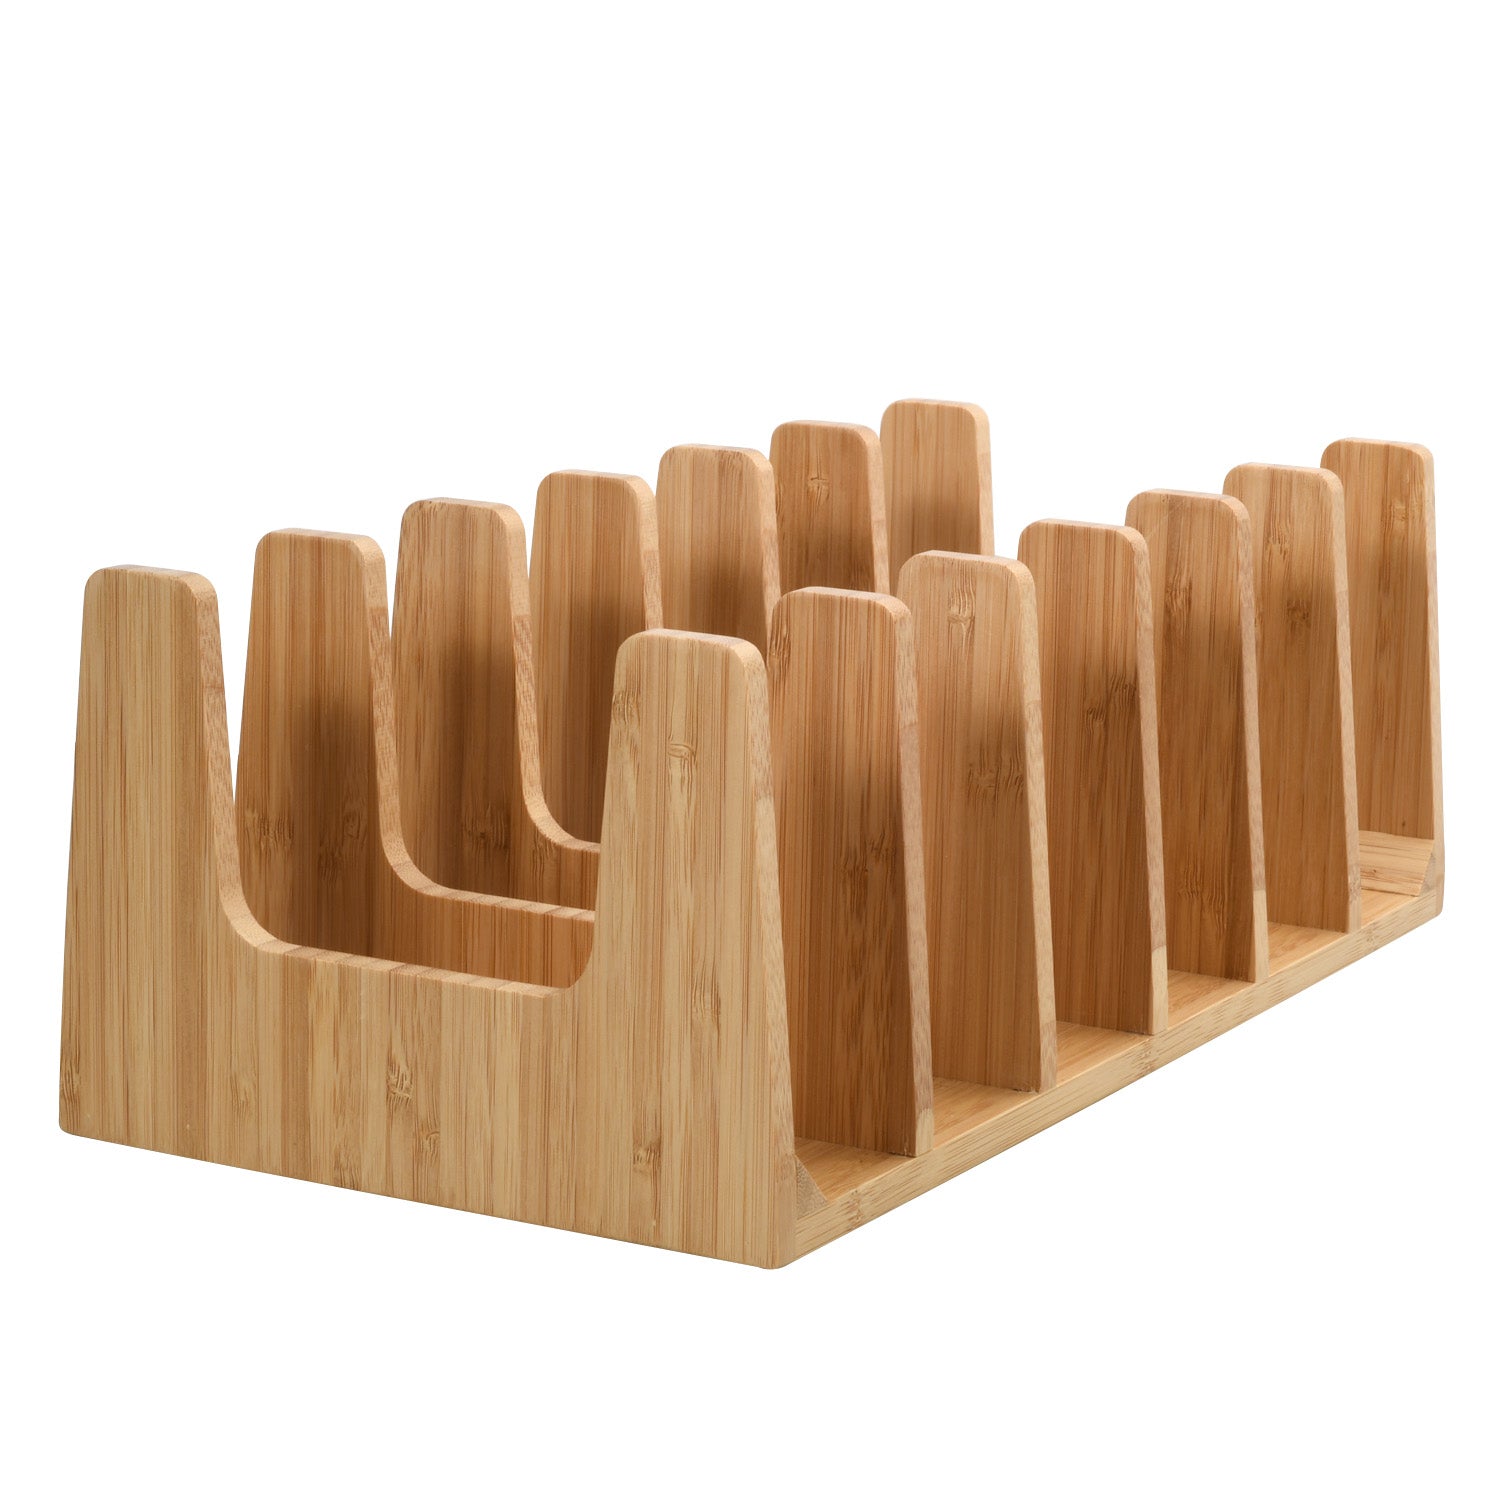 PandPal Adjustable Bamboo Lid Organizer Compatible with